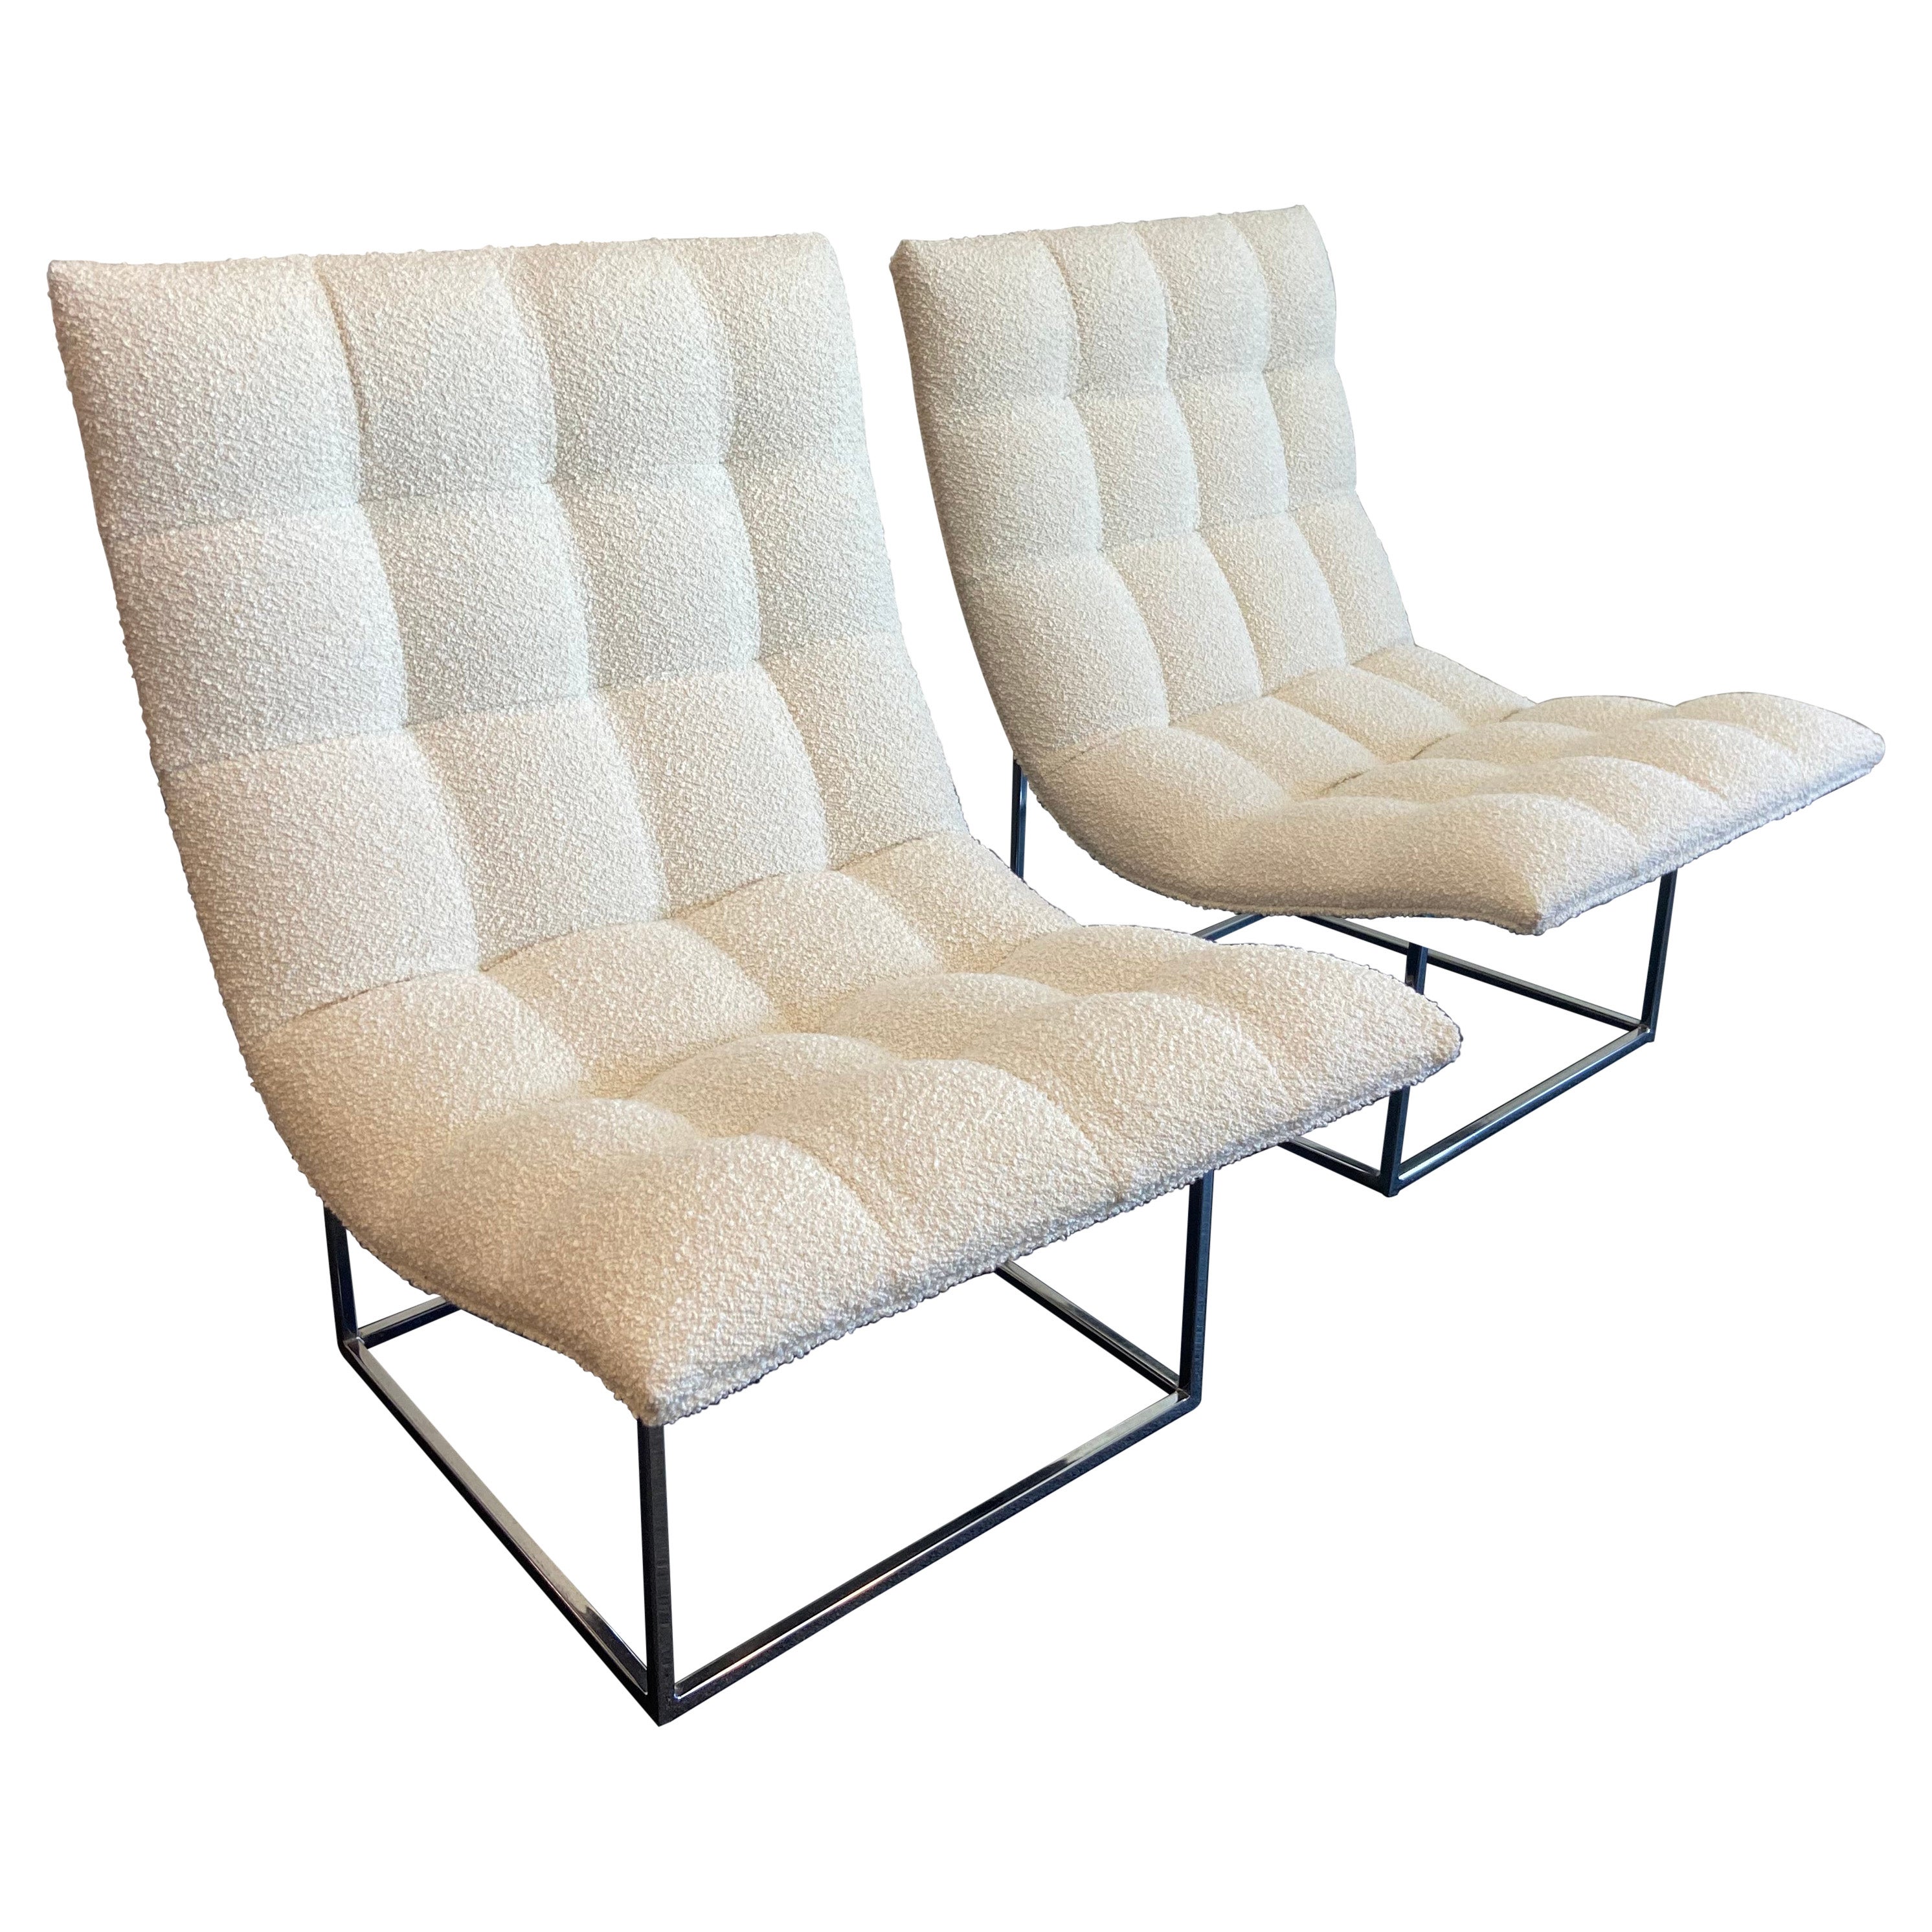 Milo Baughman For Thayer Coggin Scoop Lounge Chairs- A Pair